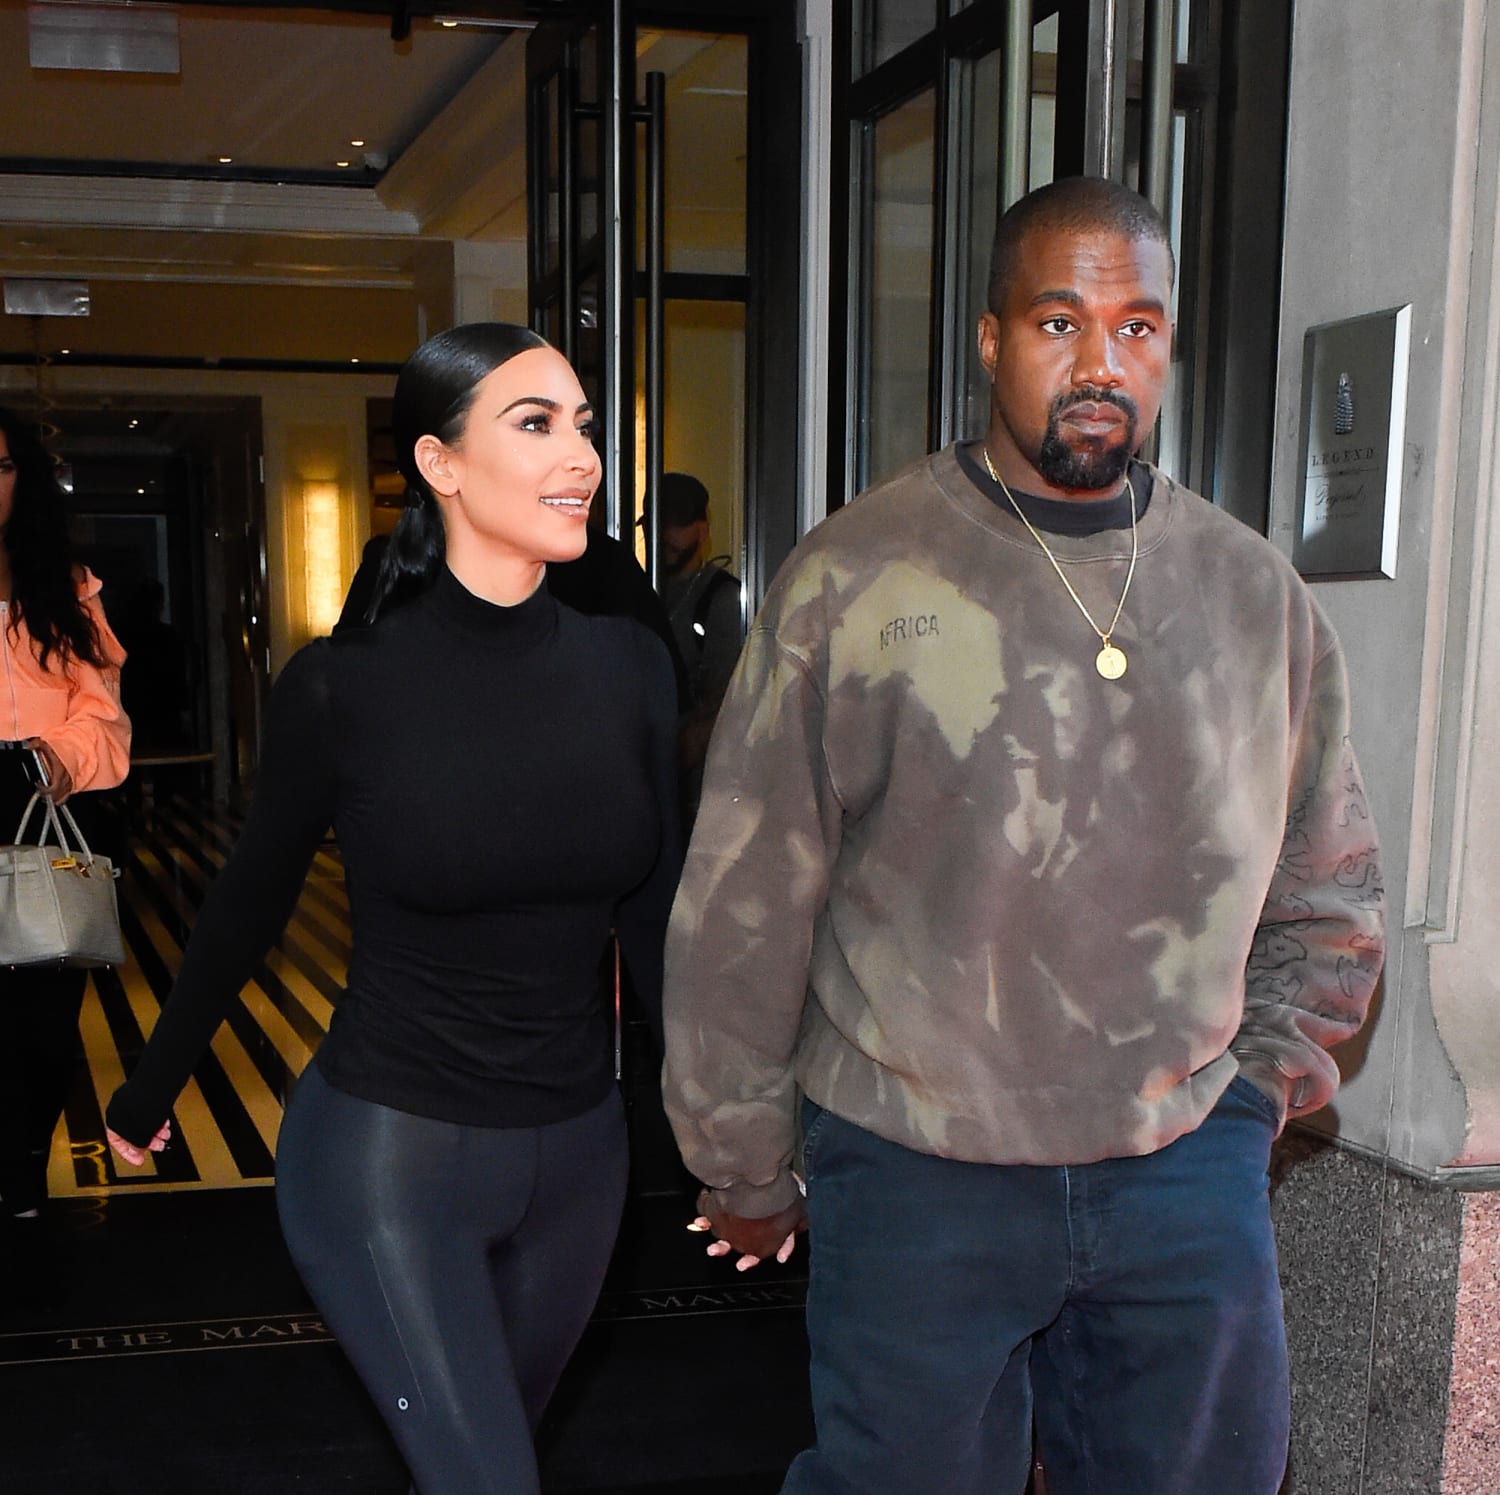 Kim Kardashian S Met Gala Dress Fight With Kanye West Is Really About His Desire To Control Her